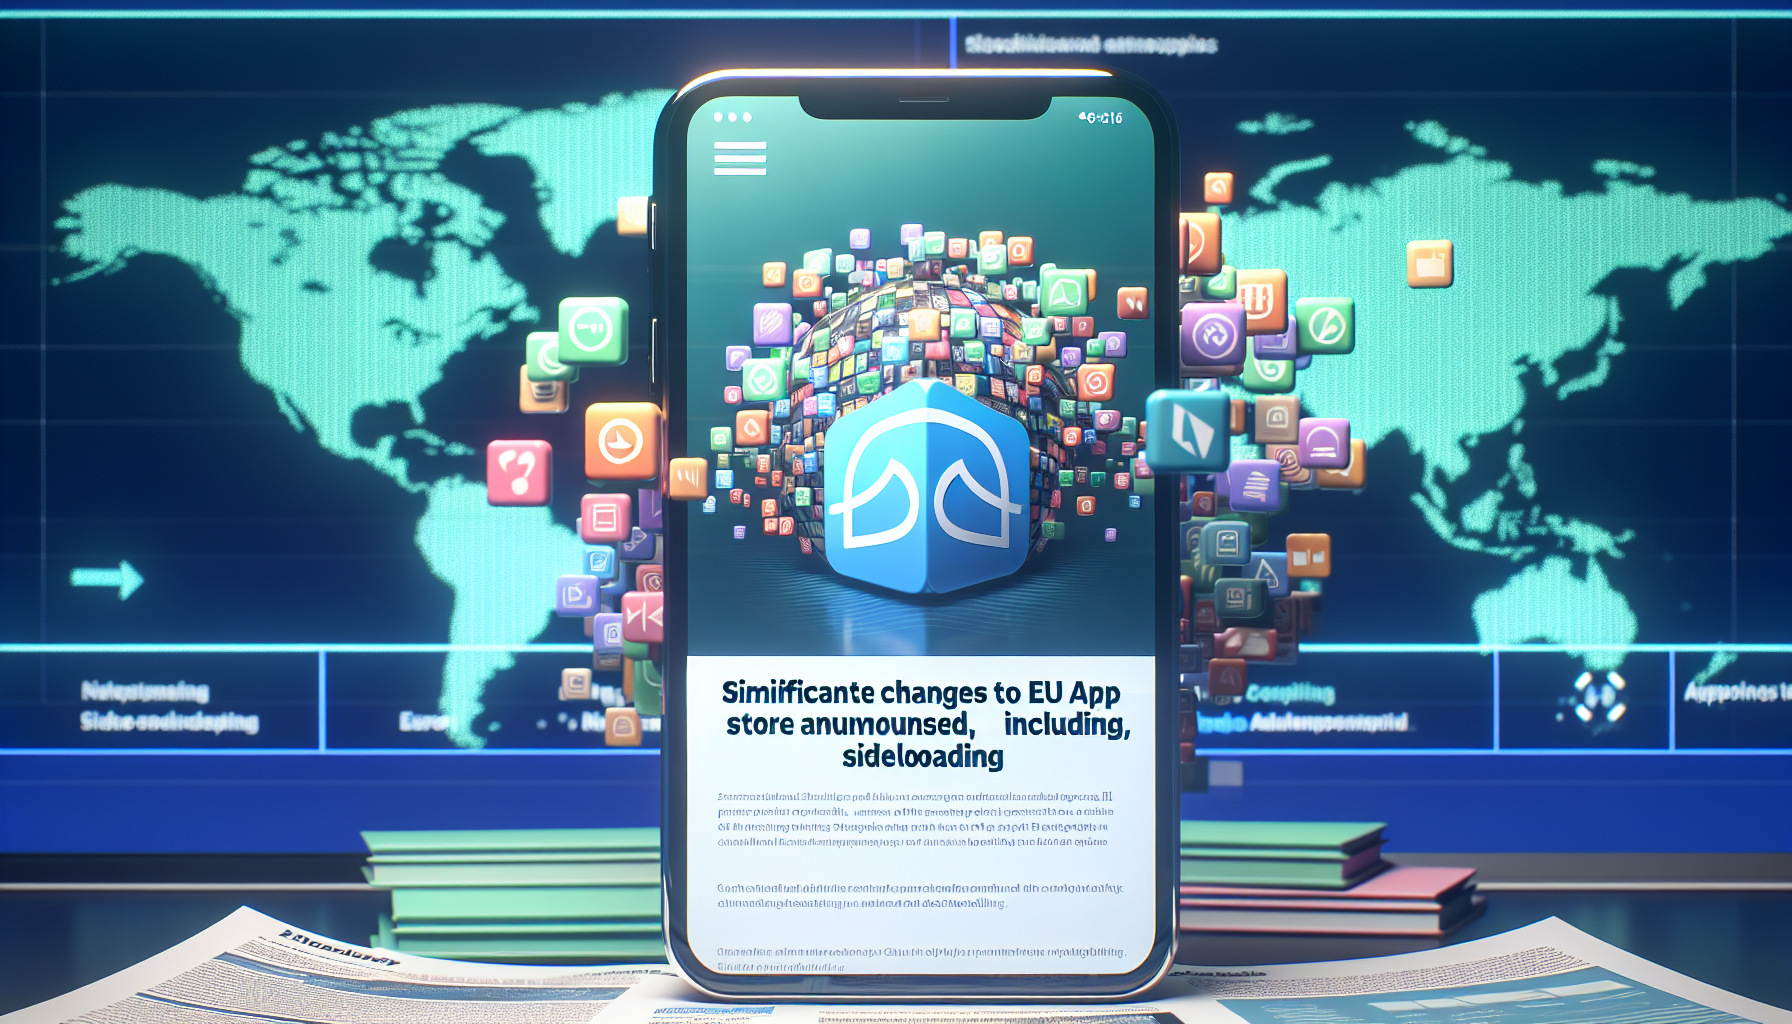 Apple announces significant changes to EU App Store policies, including sideloading.